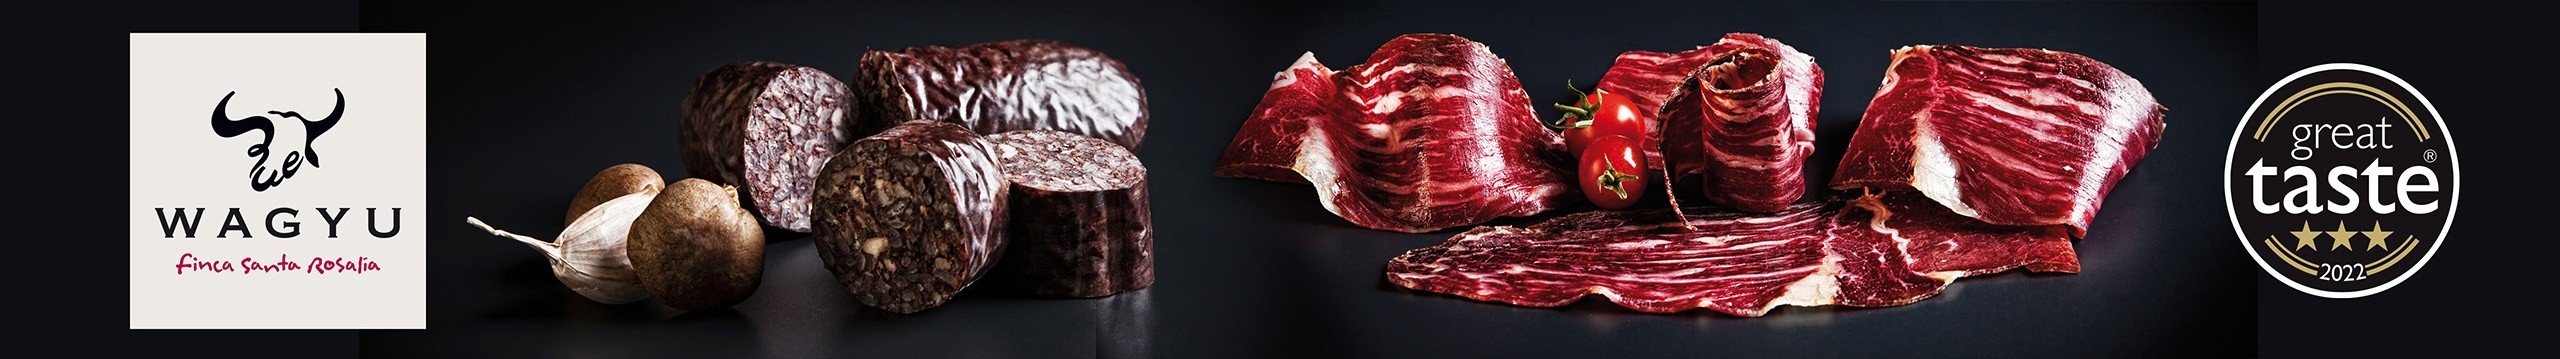 Gourmet Products - Cured Wagyu Beef Products - Official Store